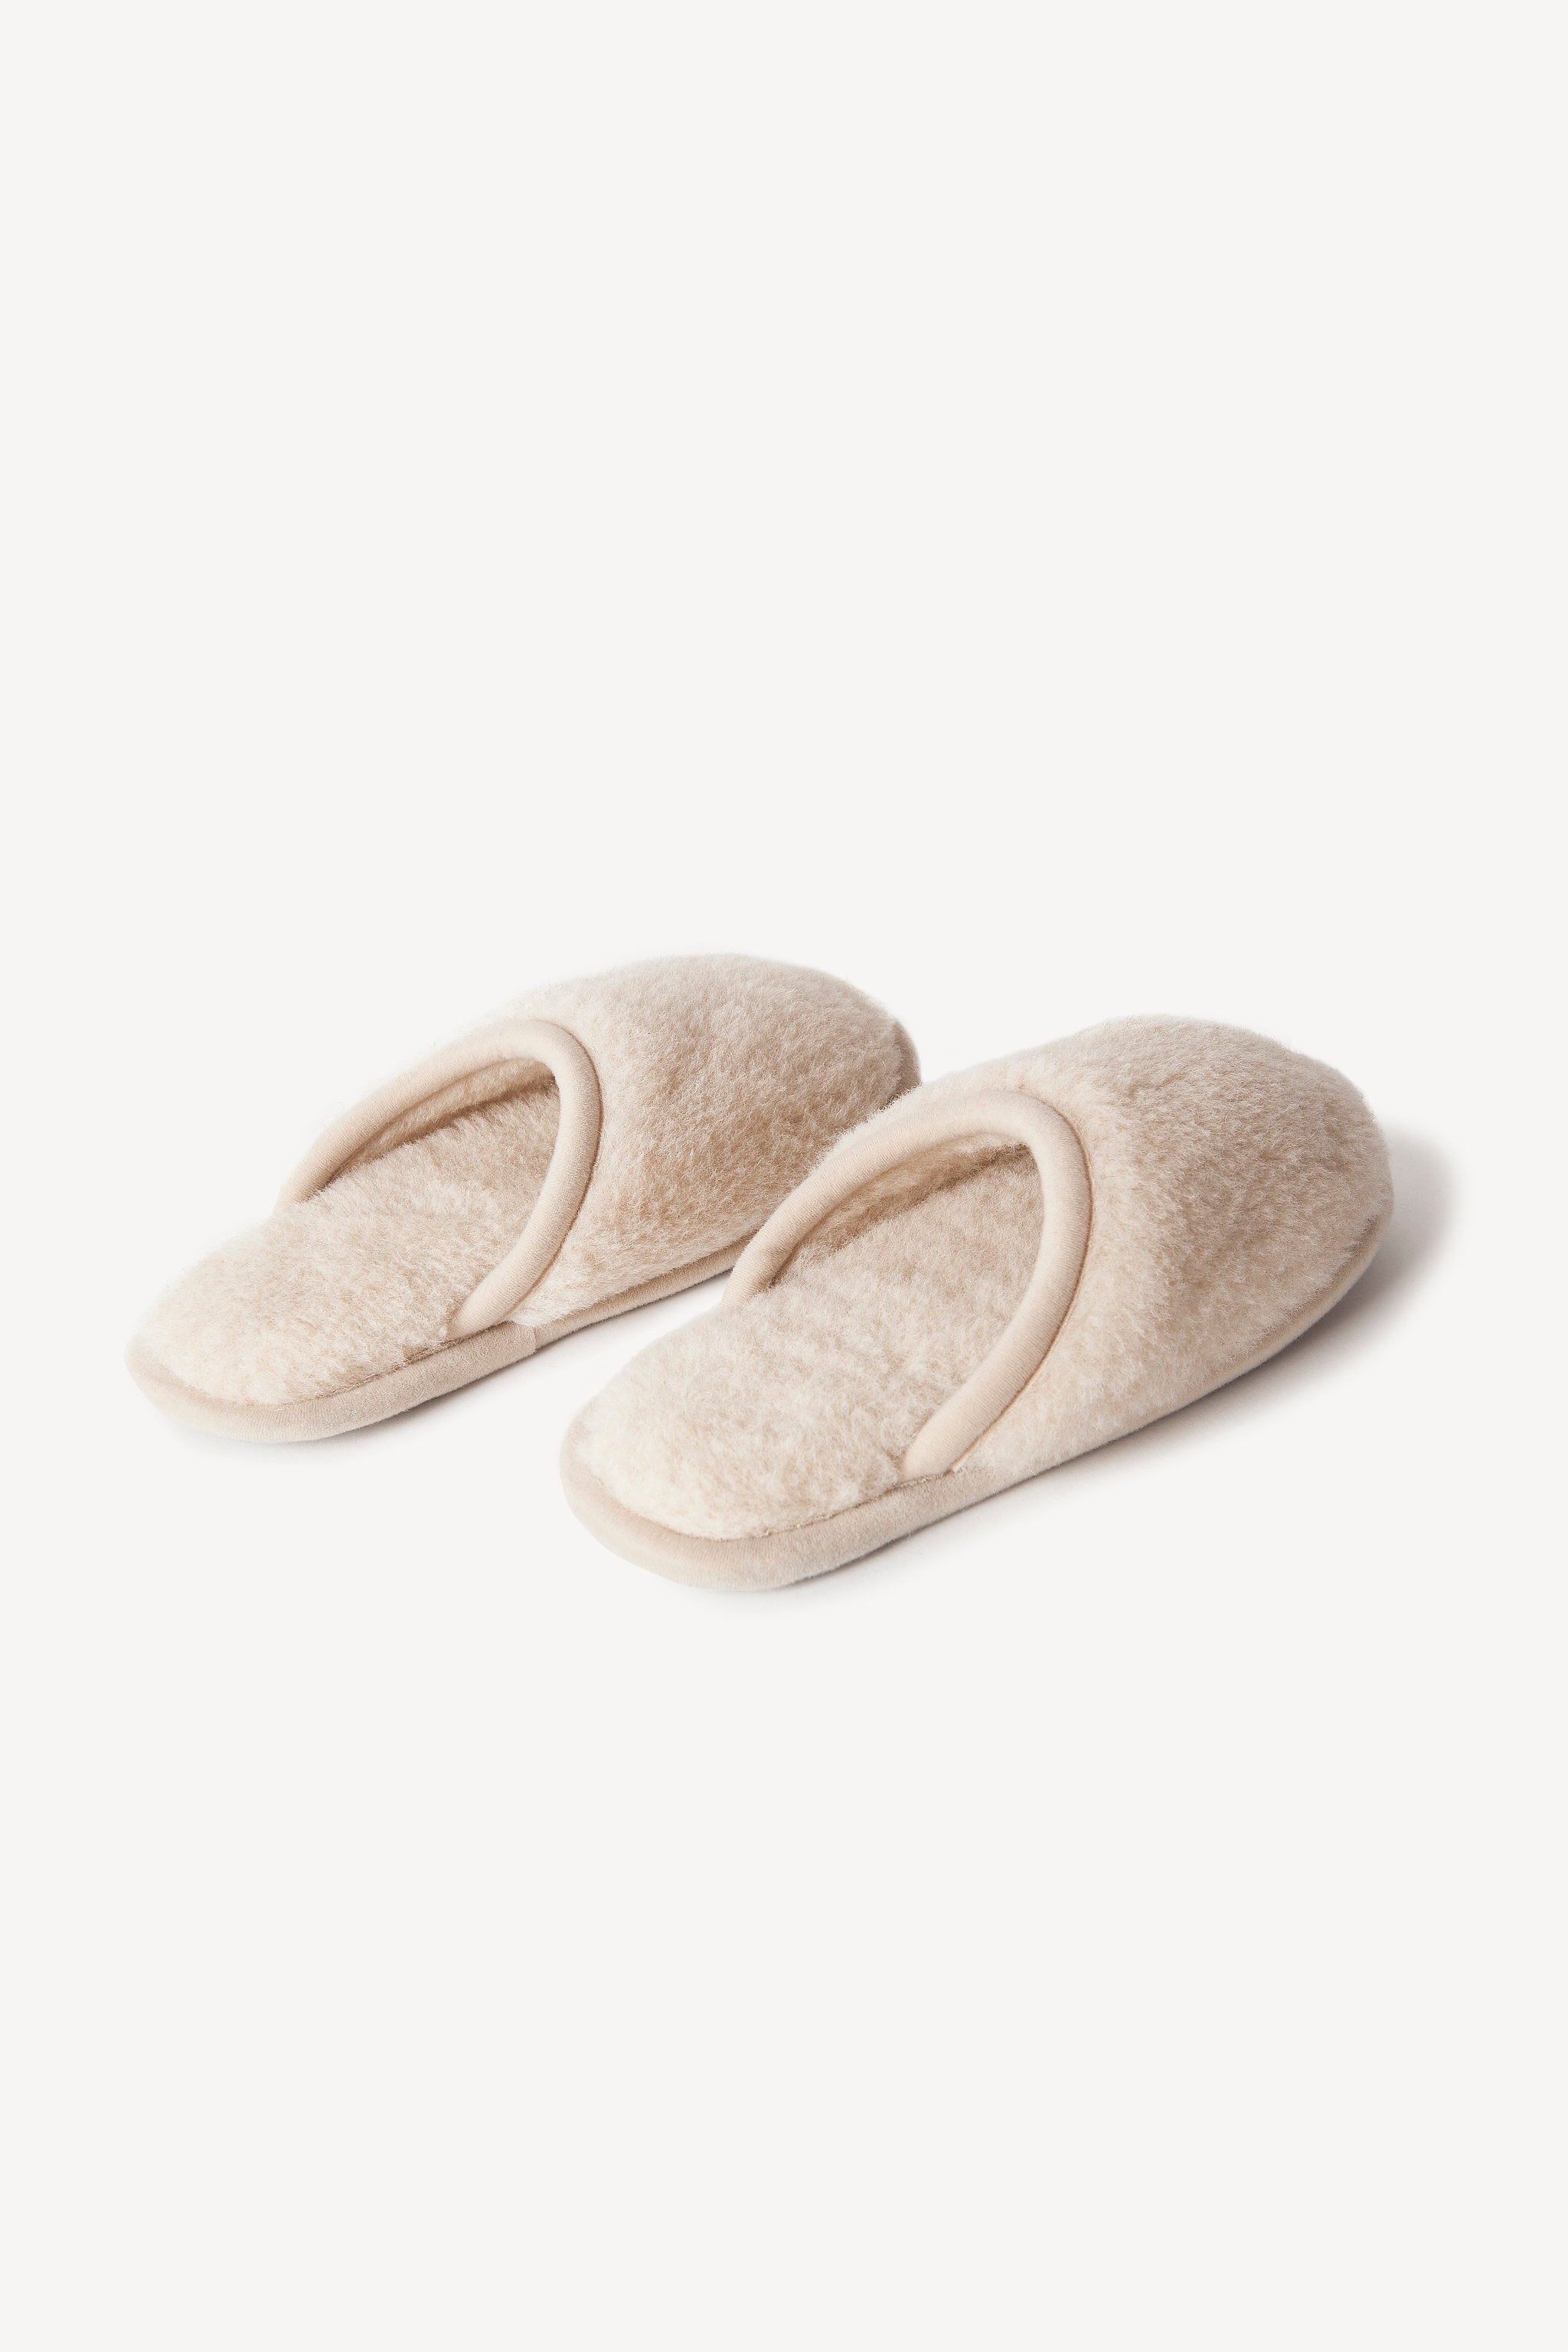 white color slippers